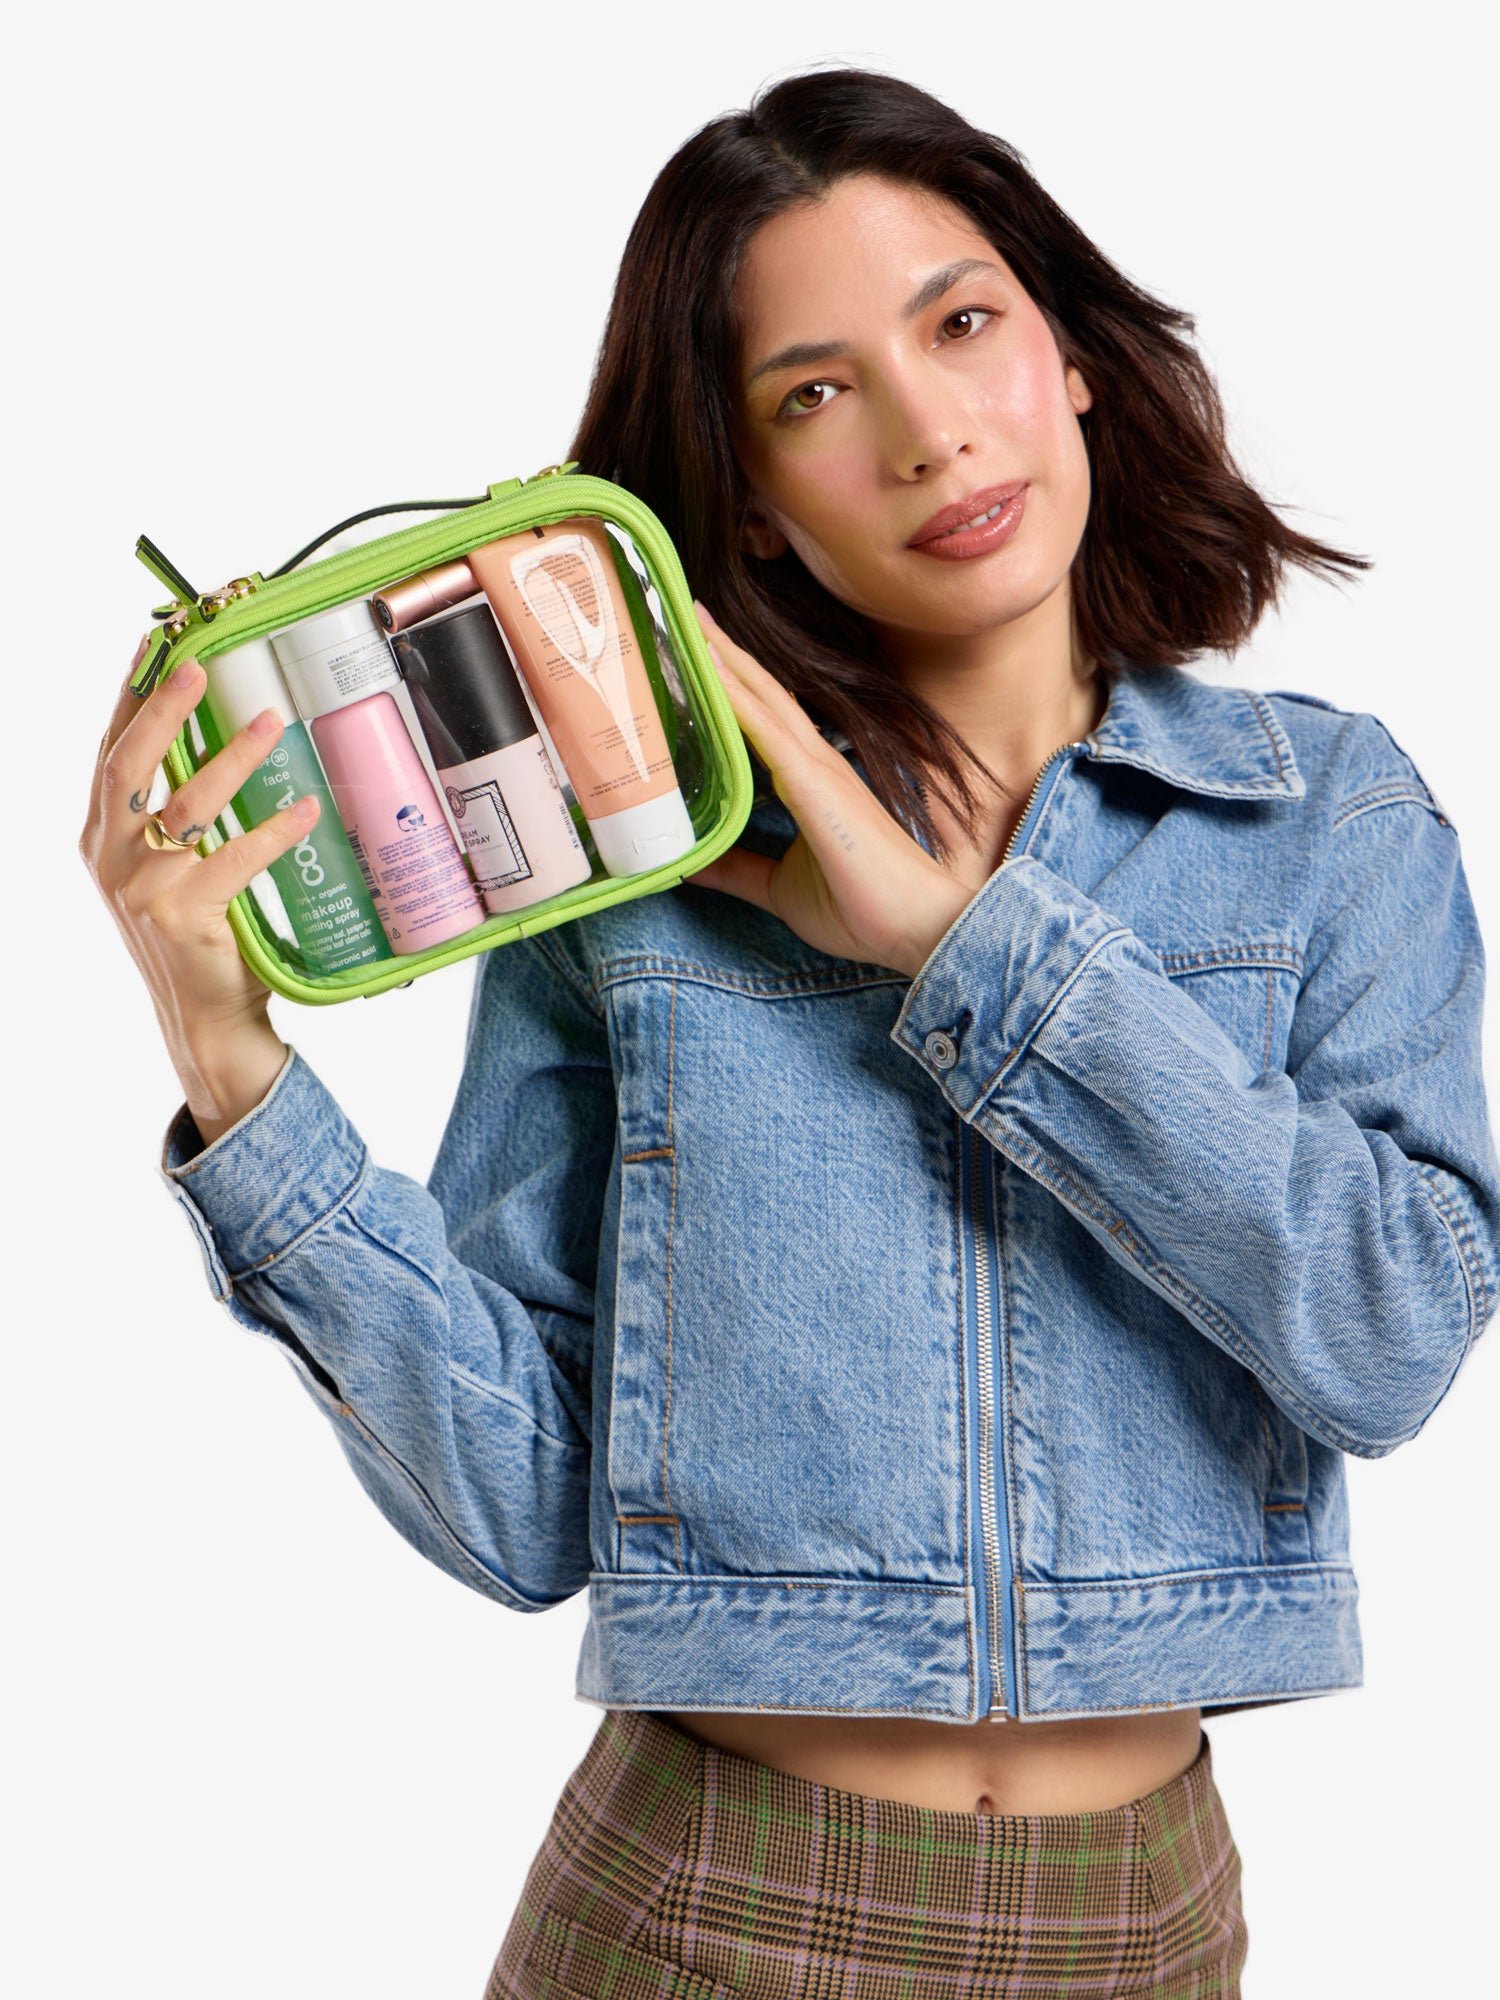 Model holding up CALPAK small clear cosmetic case in bright green